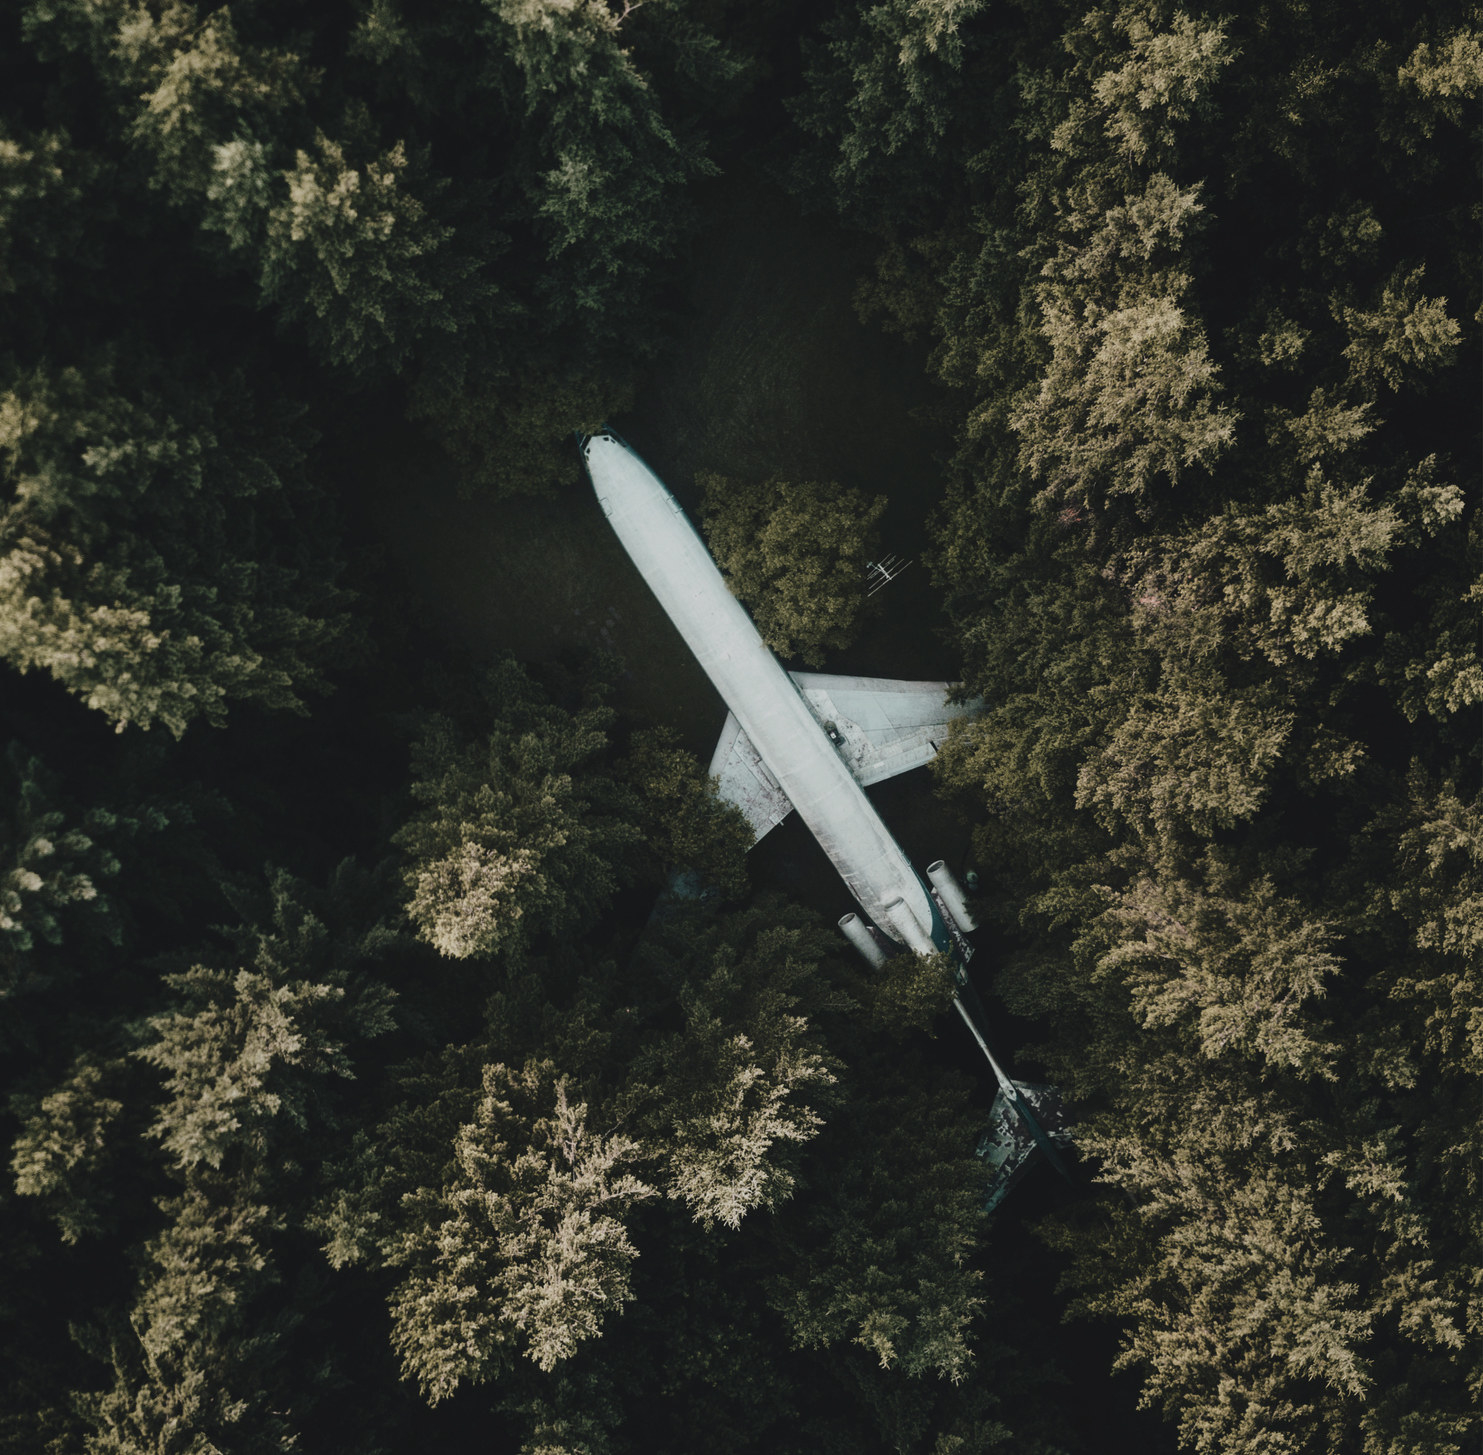 A plane in the trees